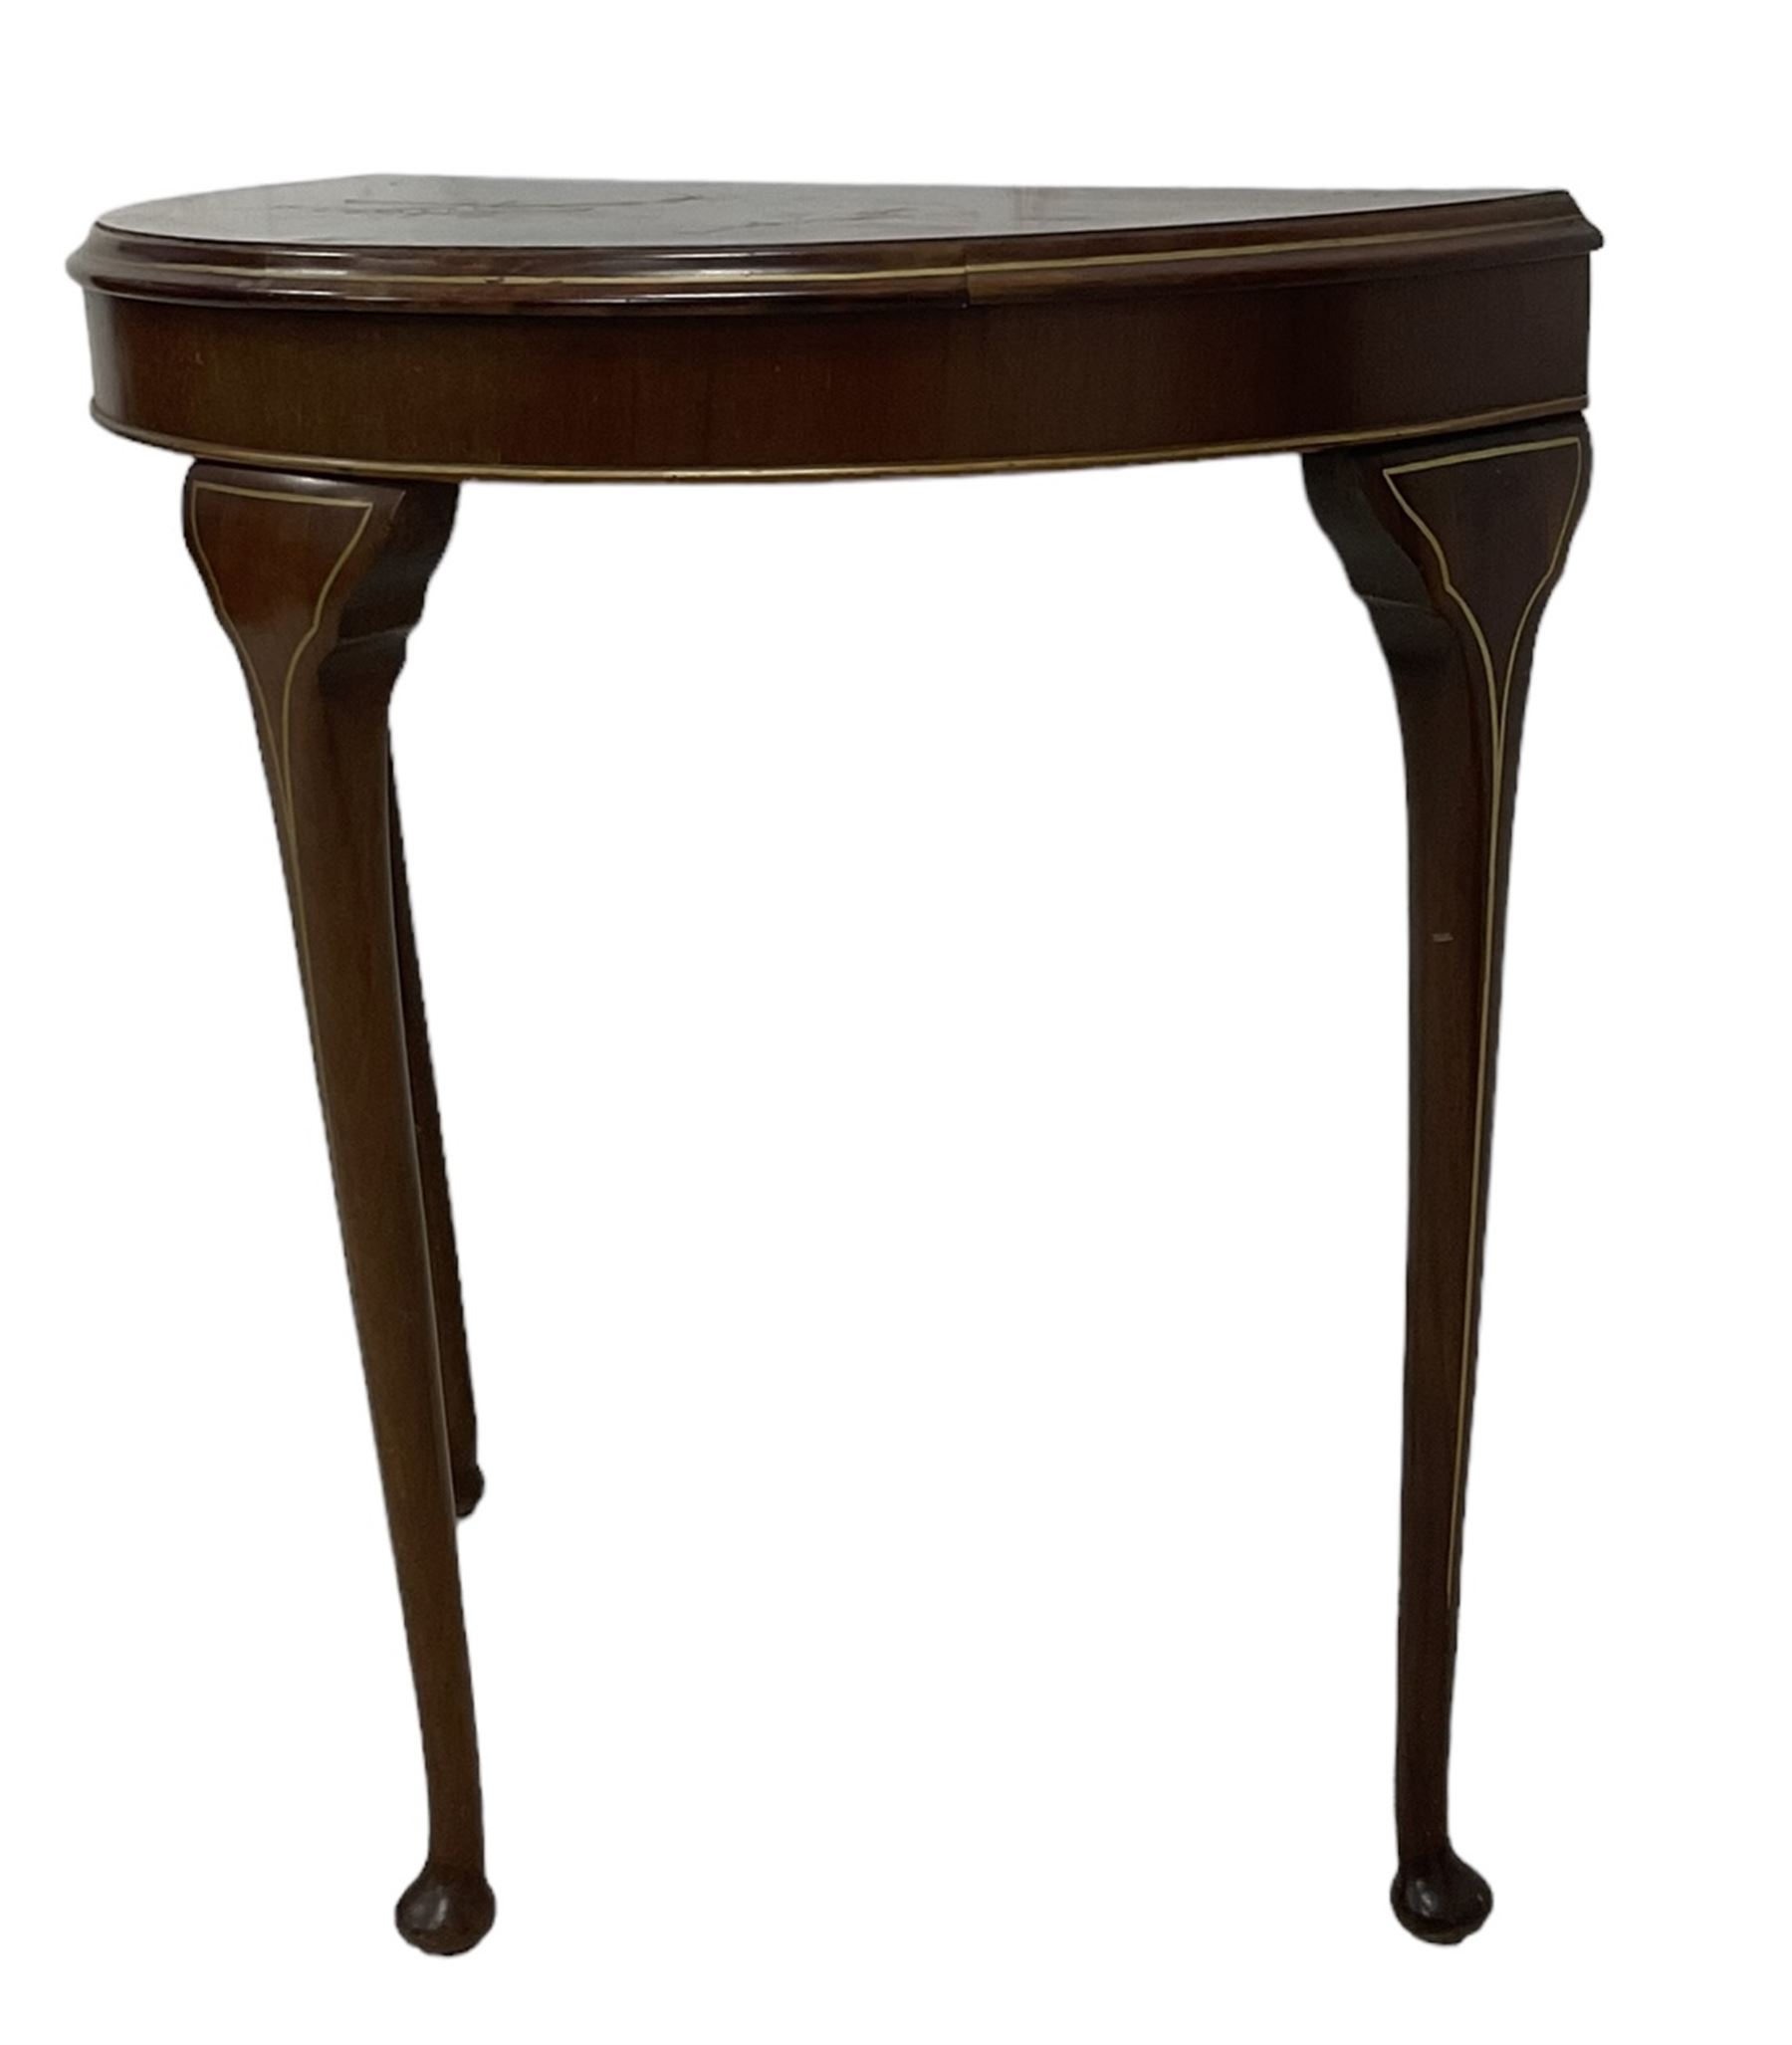 Early to mid-20th century demi-lune mahogany console table - Image 4 of 6